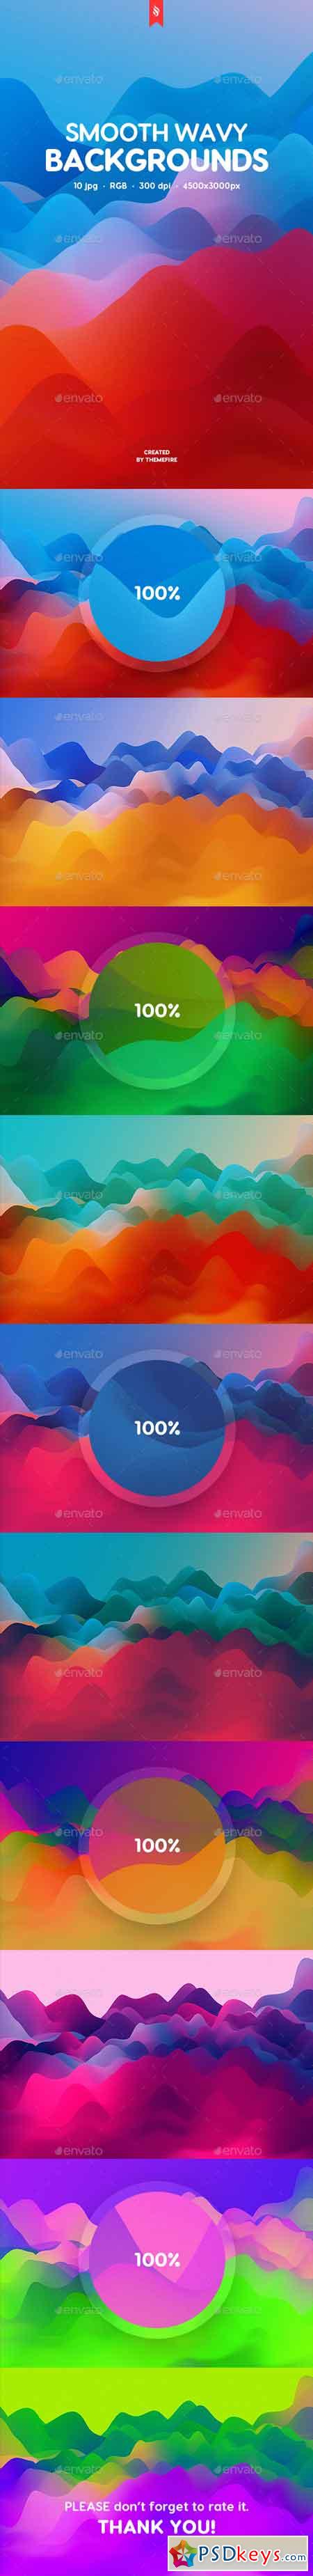 Colorful Smooth Wavy Backgrounds 19724817